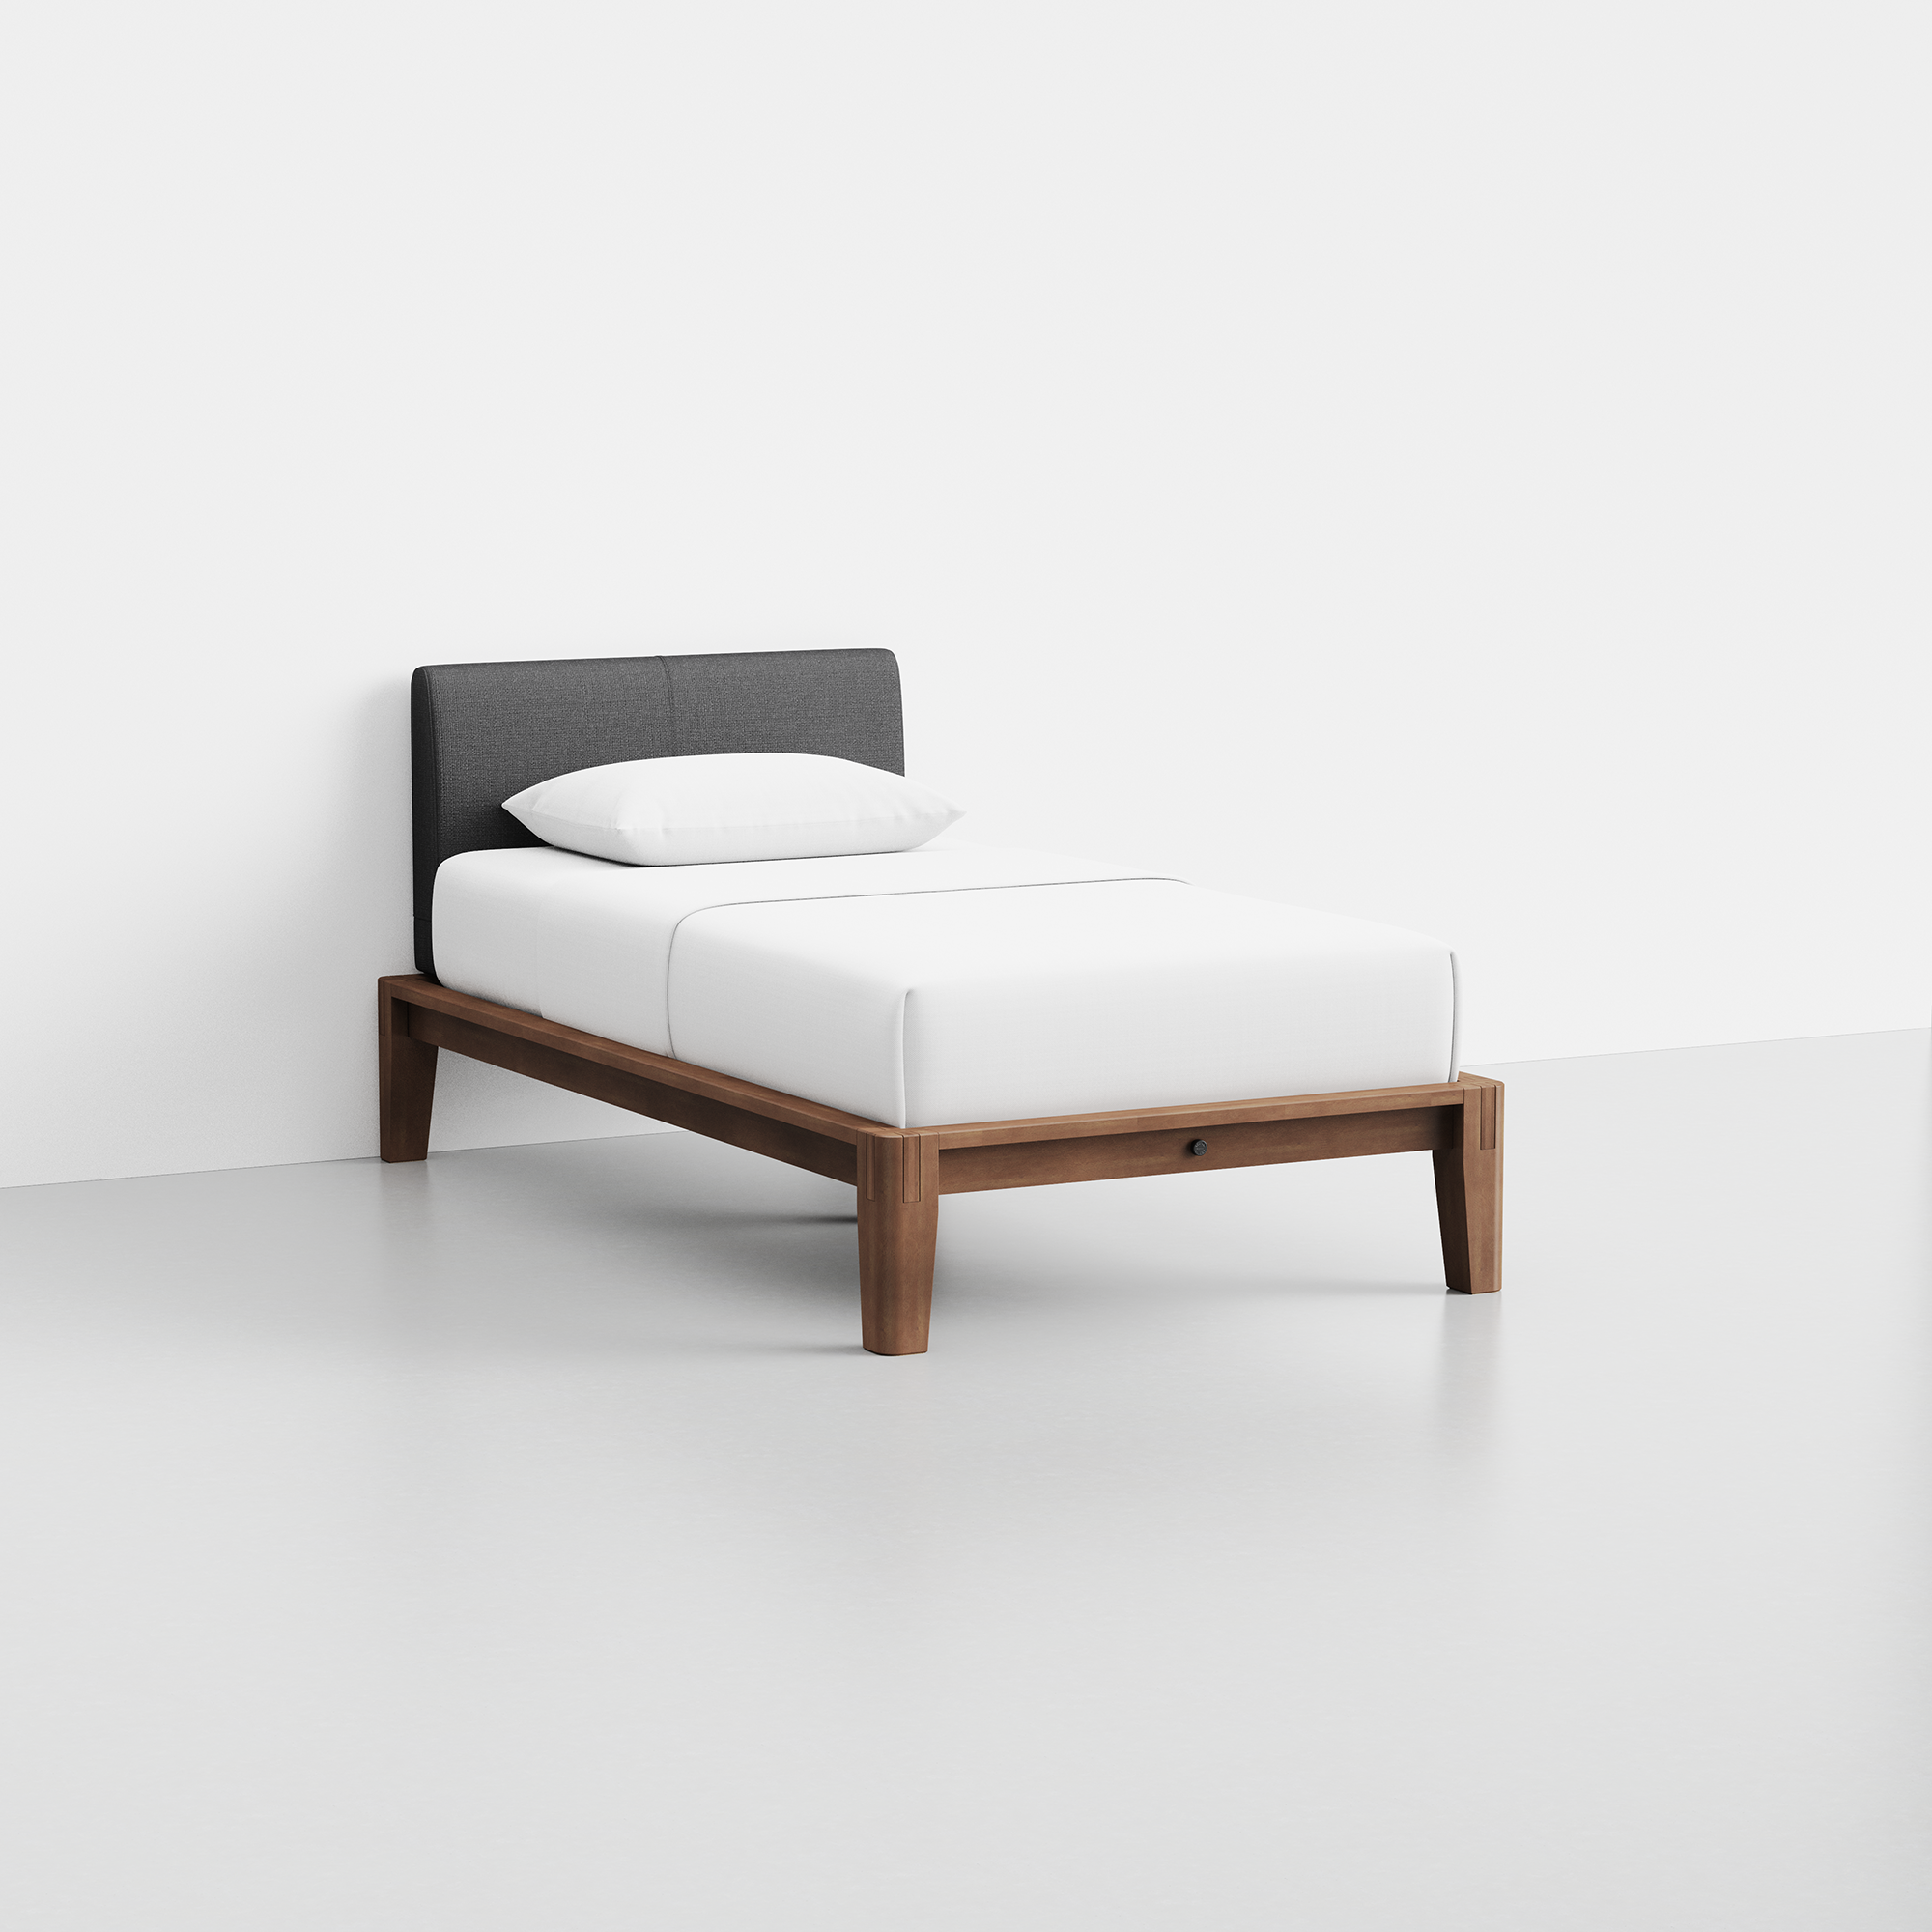 The Bed (Twin / Walnut / Dark Charcoal) - Render - Angled